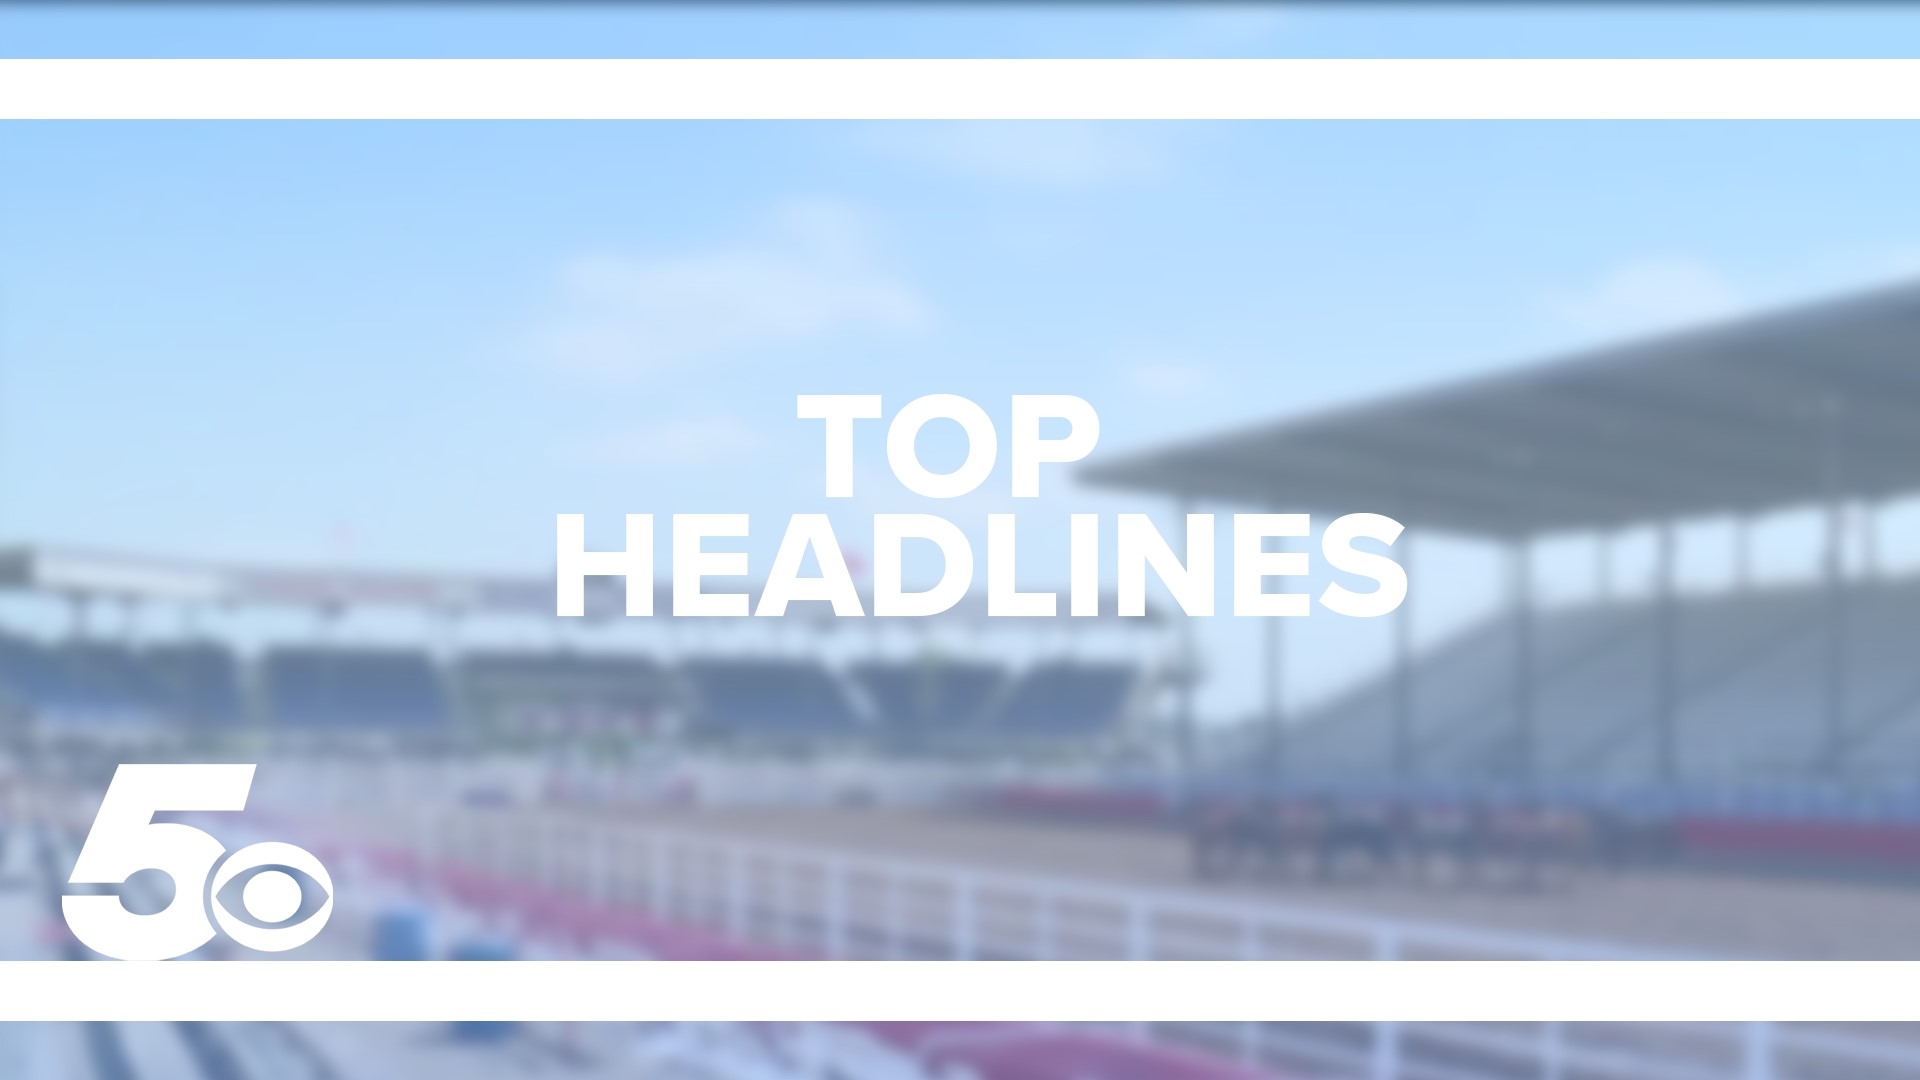 Check out today's top headlines including weather, Rodeo of the Ozarks, and more!